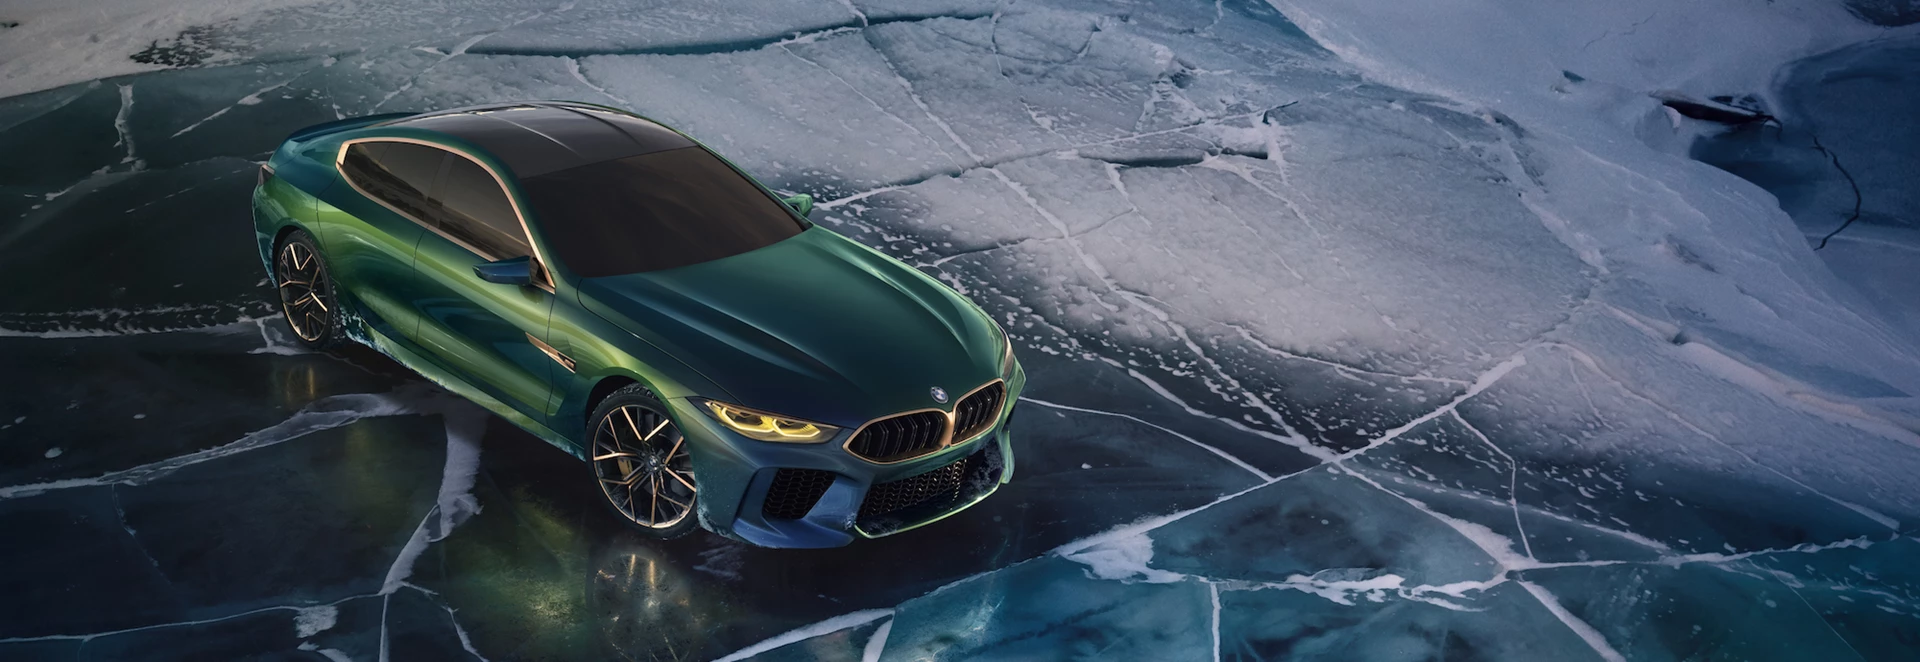 All we know about the 2019 BMW M8 Gran Coupe